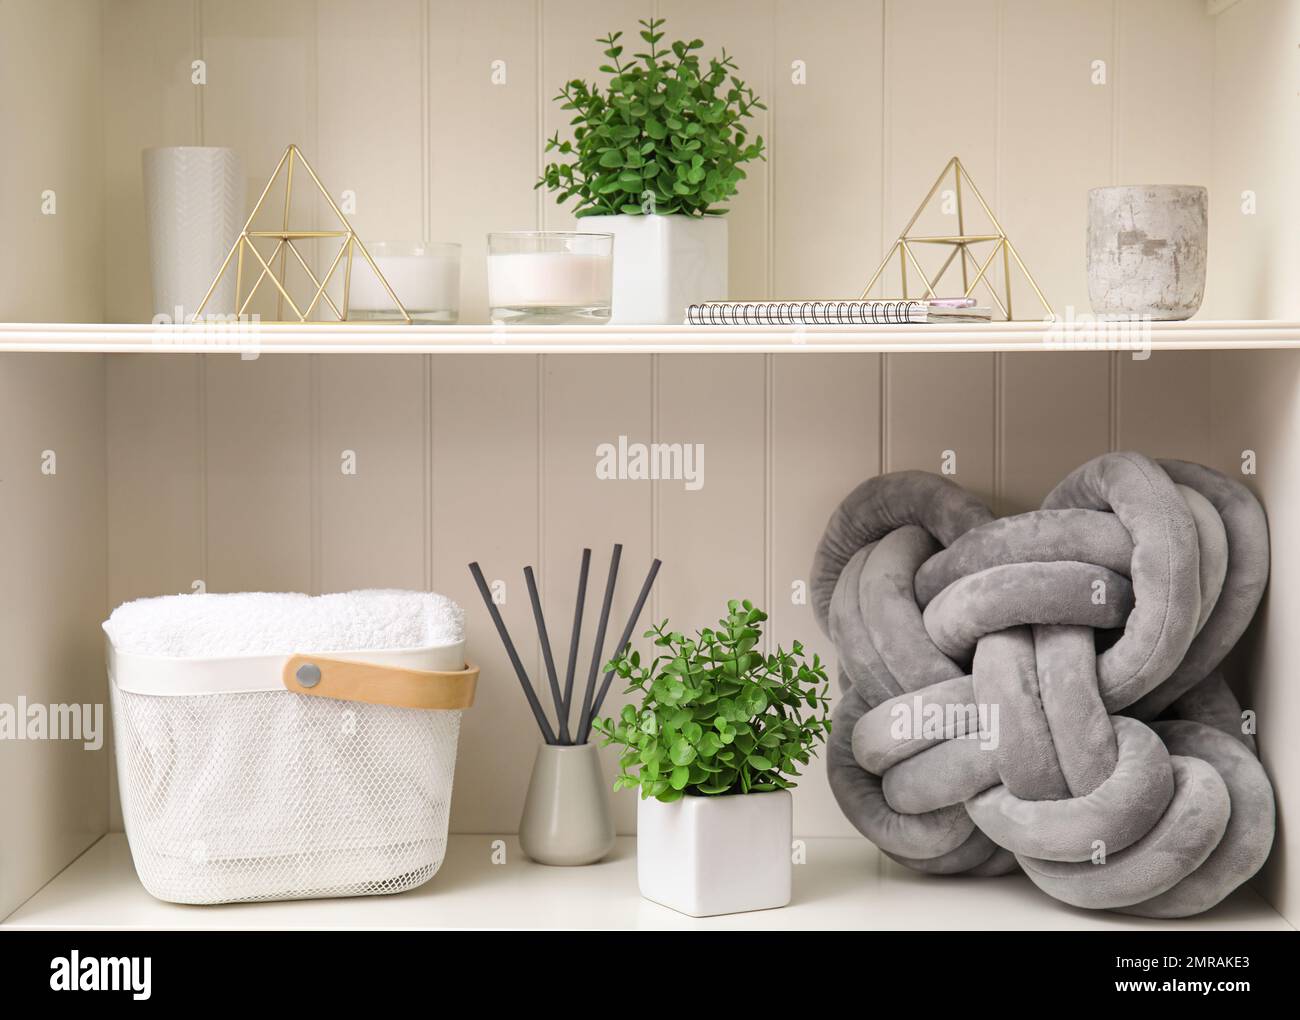 White shelving unit with plants and different decorative stuff Stock Photo